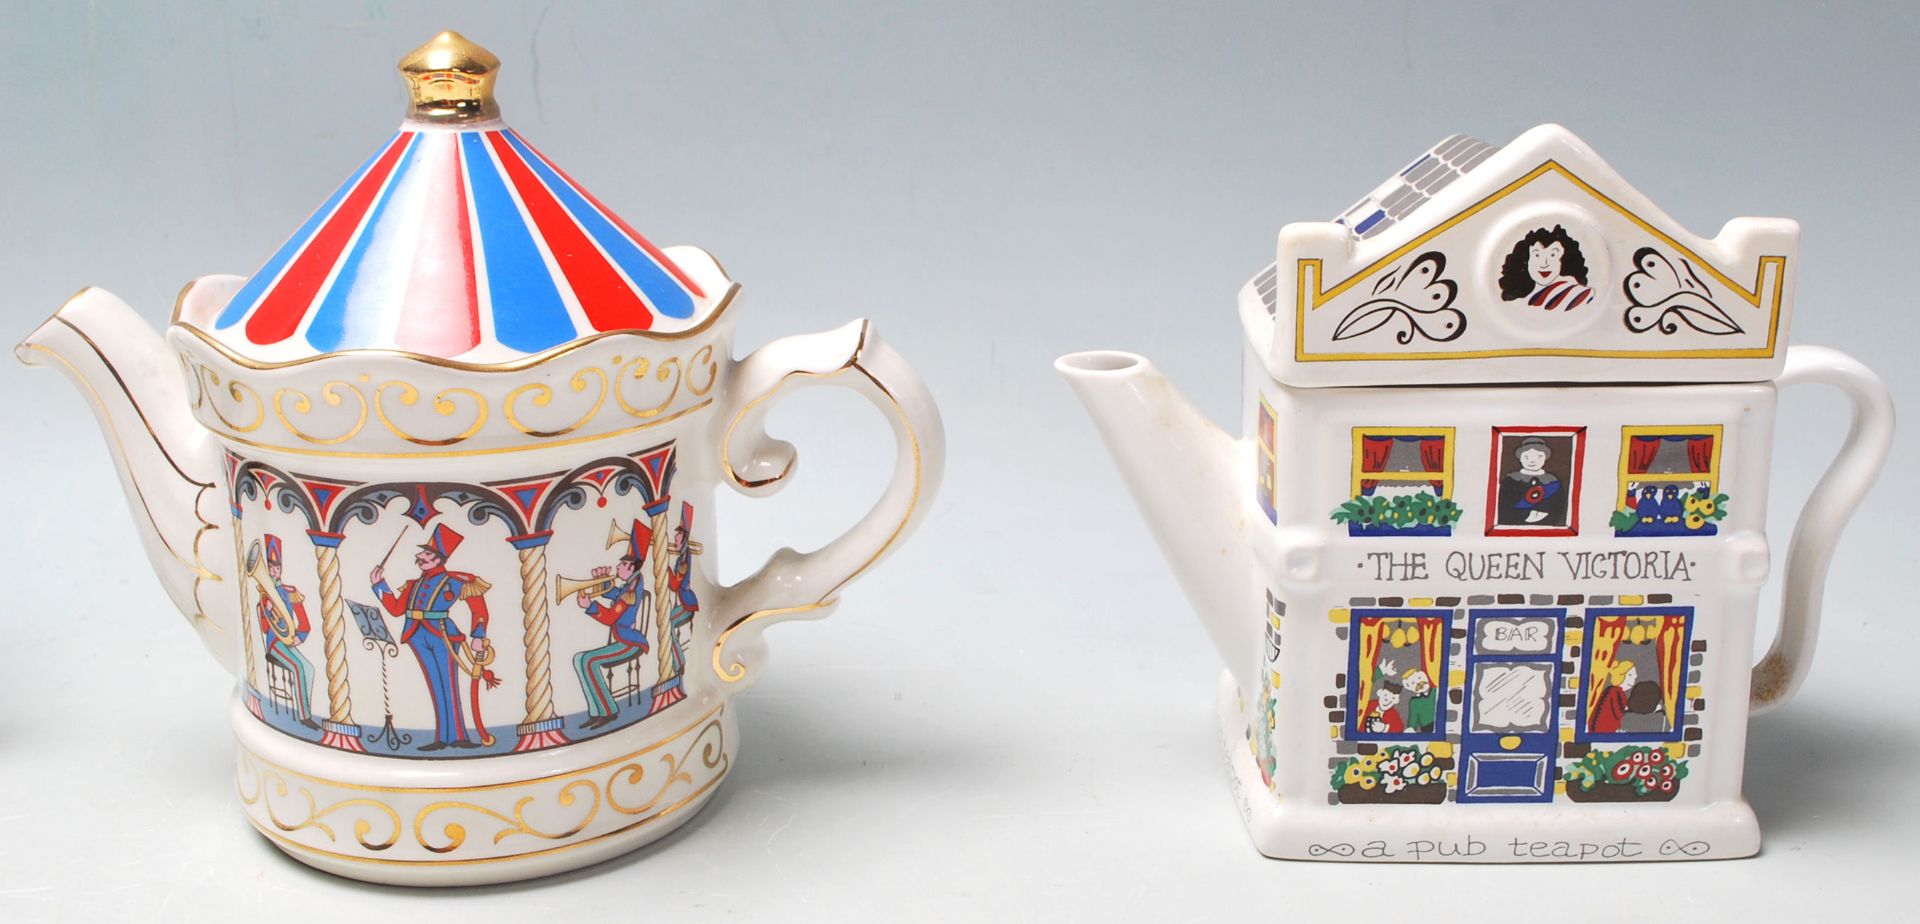 A collection of six 20th century retro teapots made by Wade being modelled in a vintage and - Bild 7 aus 7